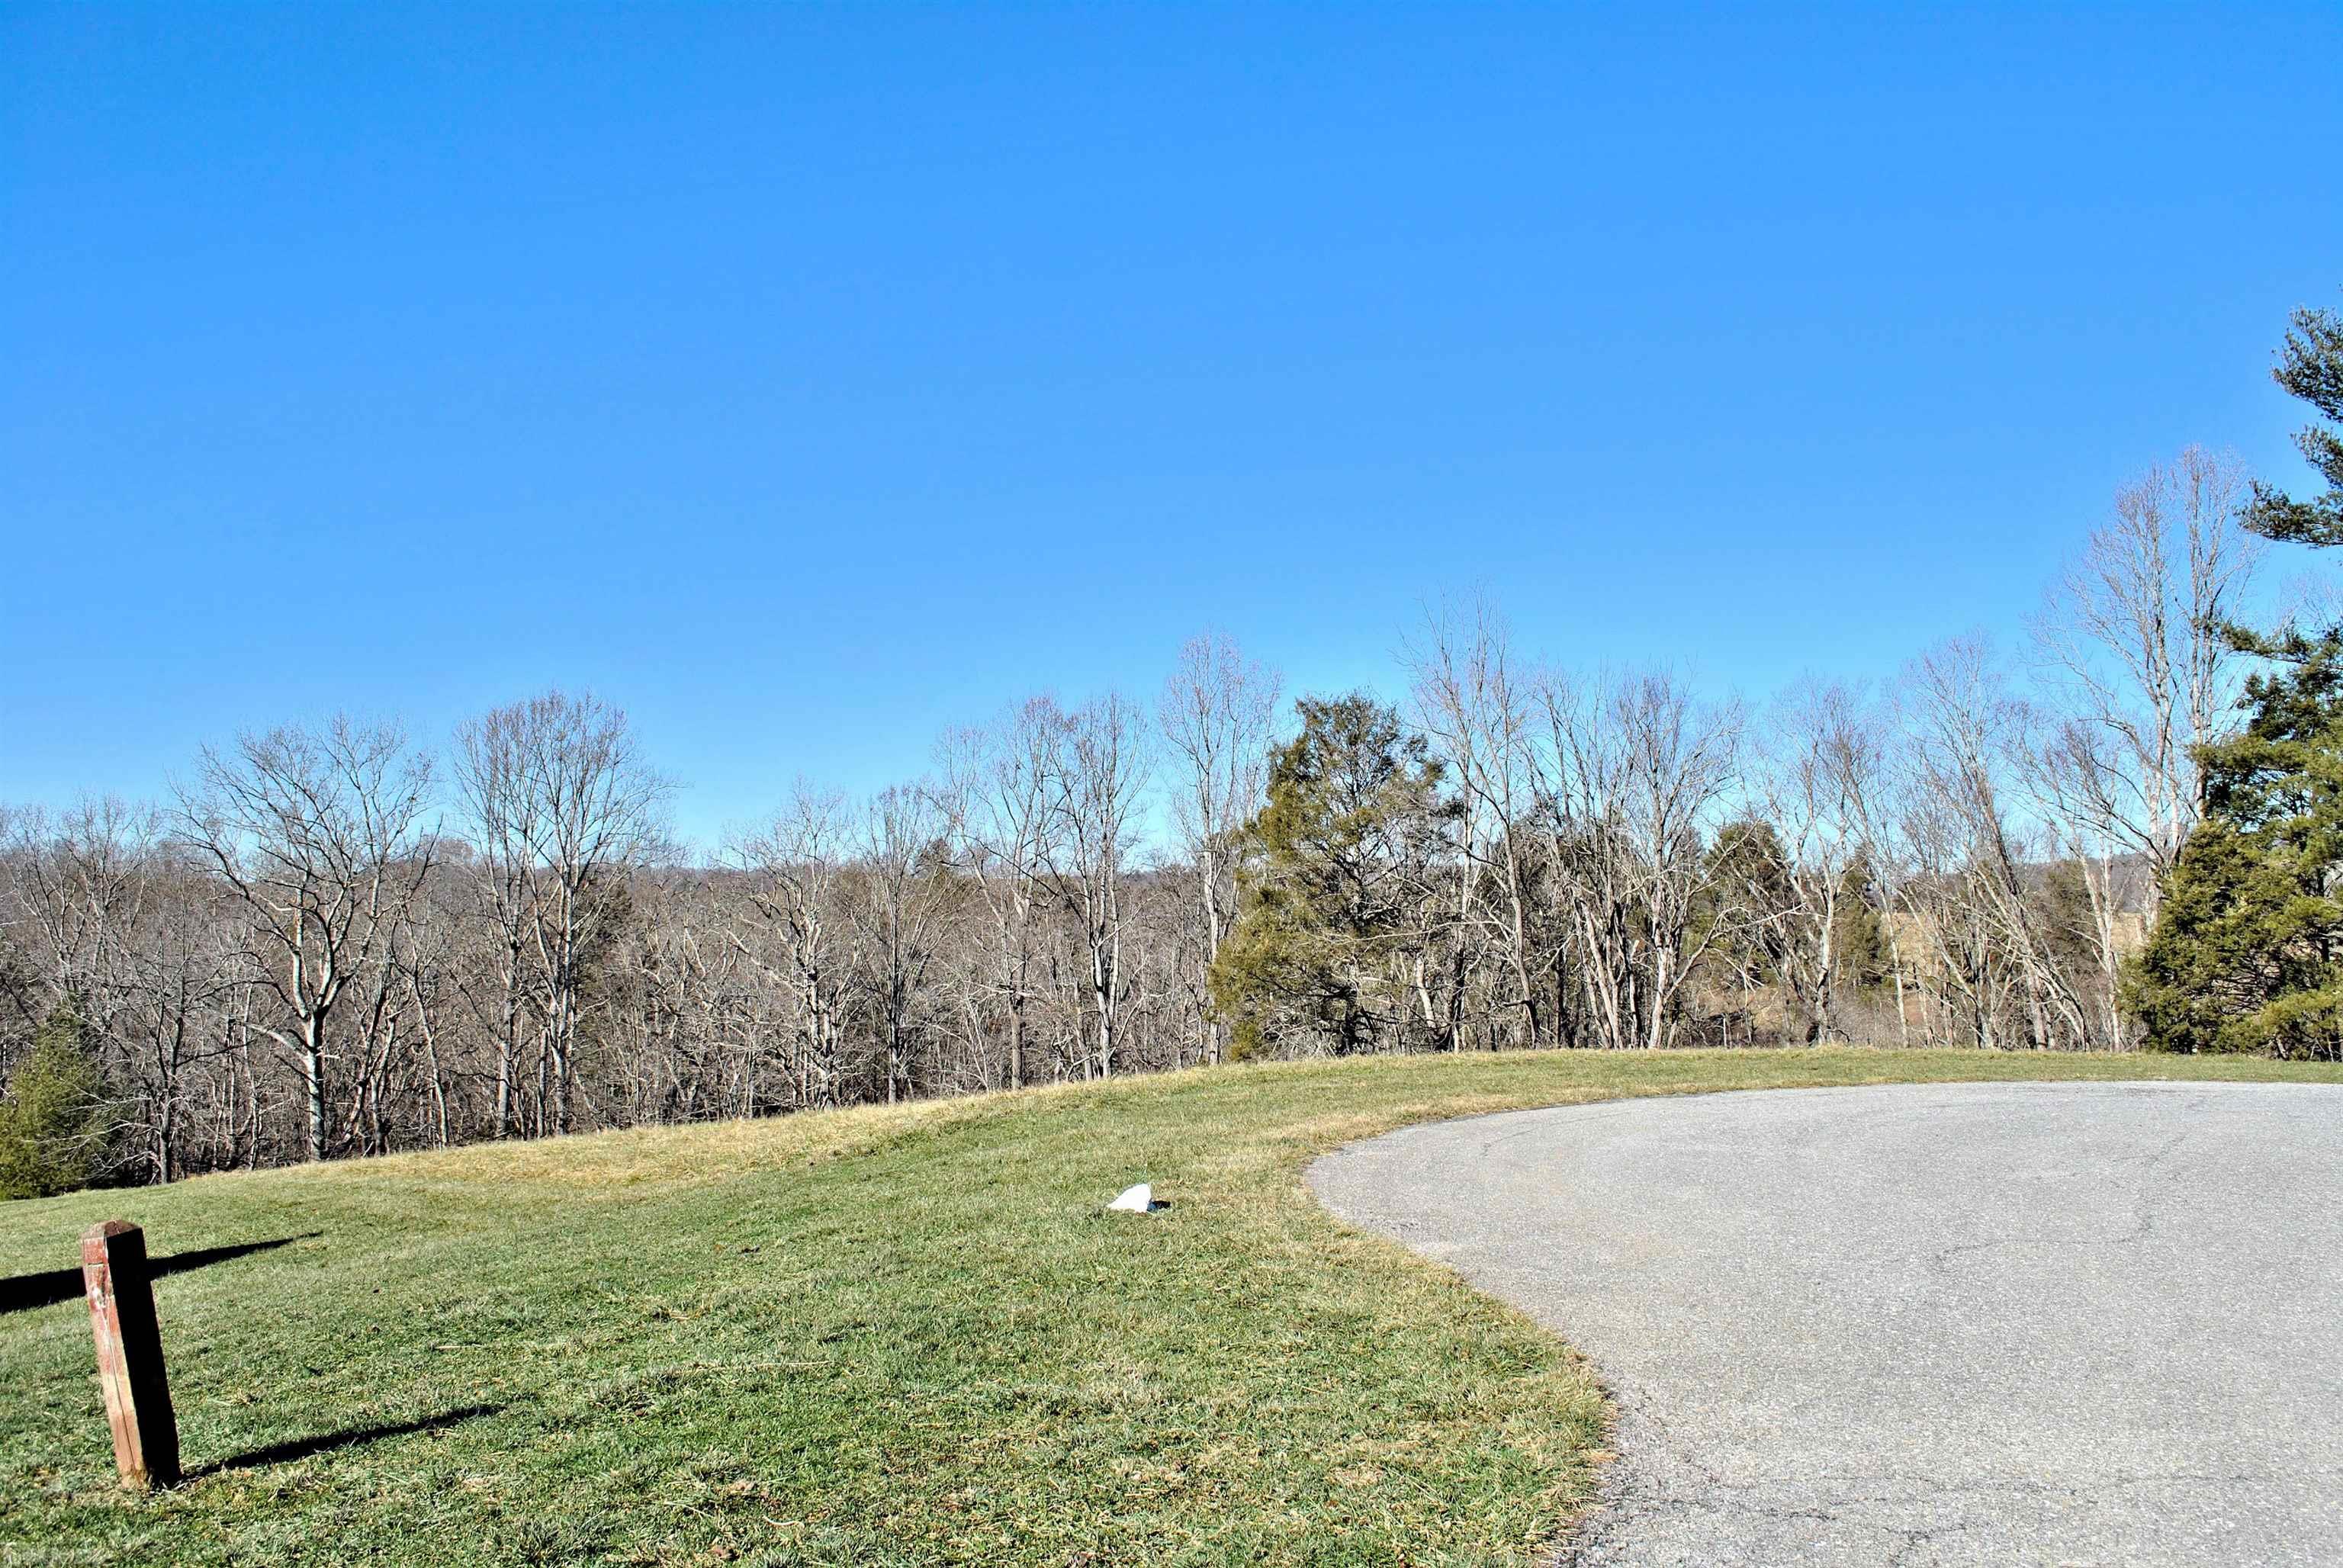 Build your dream on this open lot  at the end of a cul-de-sac with great mountain views!  Property has High Speed Internet available with Fiber Optic Cable at the property so you can work from home!  The property has perk test completed for a 3 bedroom home.  Conveniently located within 15 to 20 minutes to I-81, Christiansburg, Blacksburg, VT, Radford, RU, Carilion Hospital, Montgomery Regional Hospital, etc... Country living at is finest!  Call for a private showing!